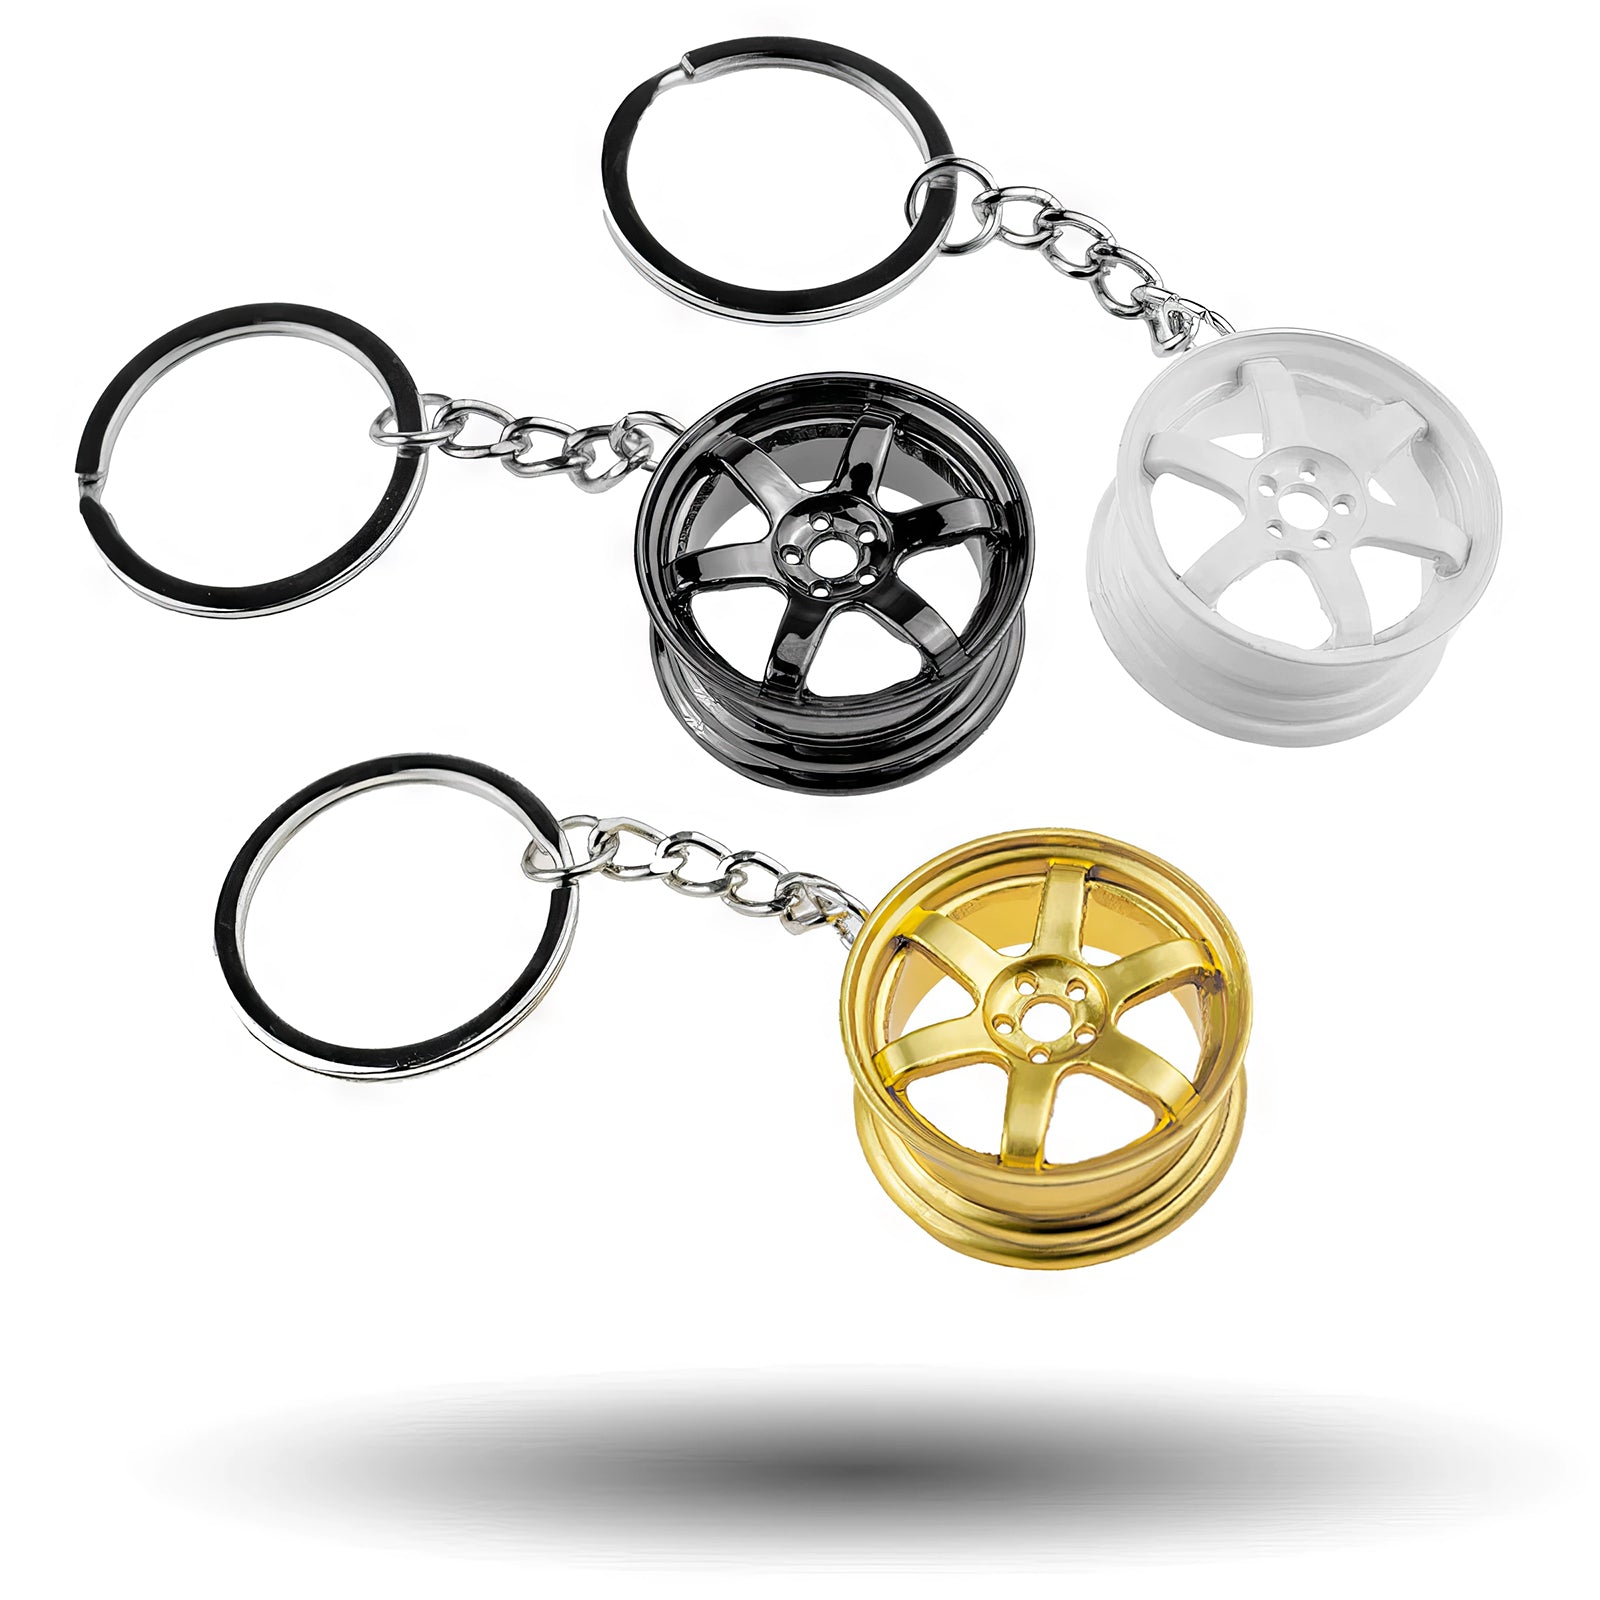 RAYS TE37 Wheel Keychain in white, black, and gold.